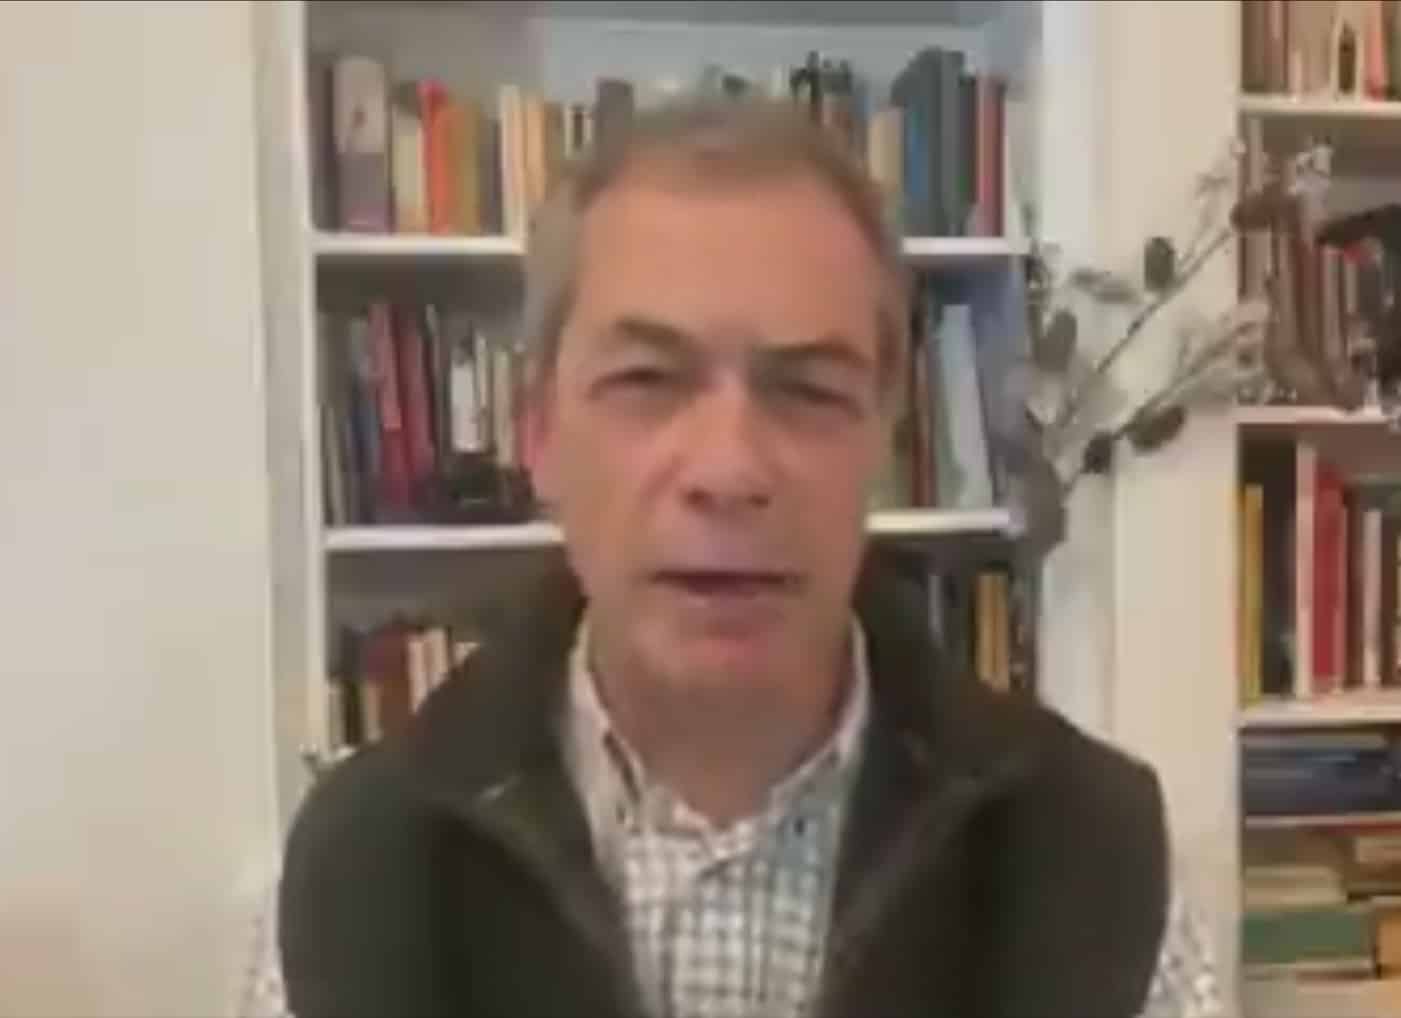 Farage joins new celebrity message app – gets reminded of Cameo howlers